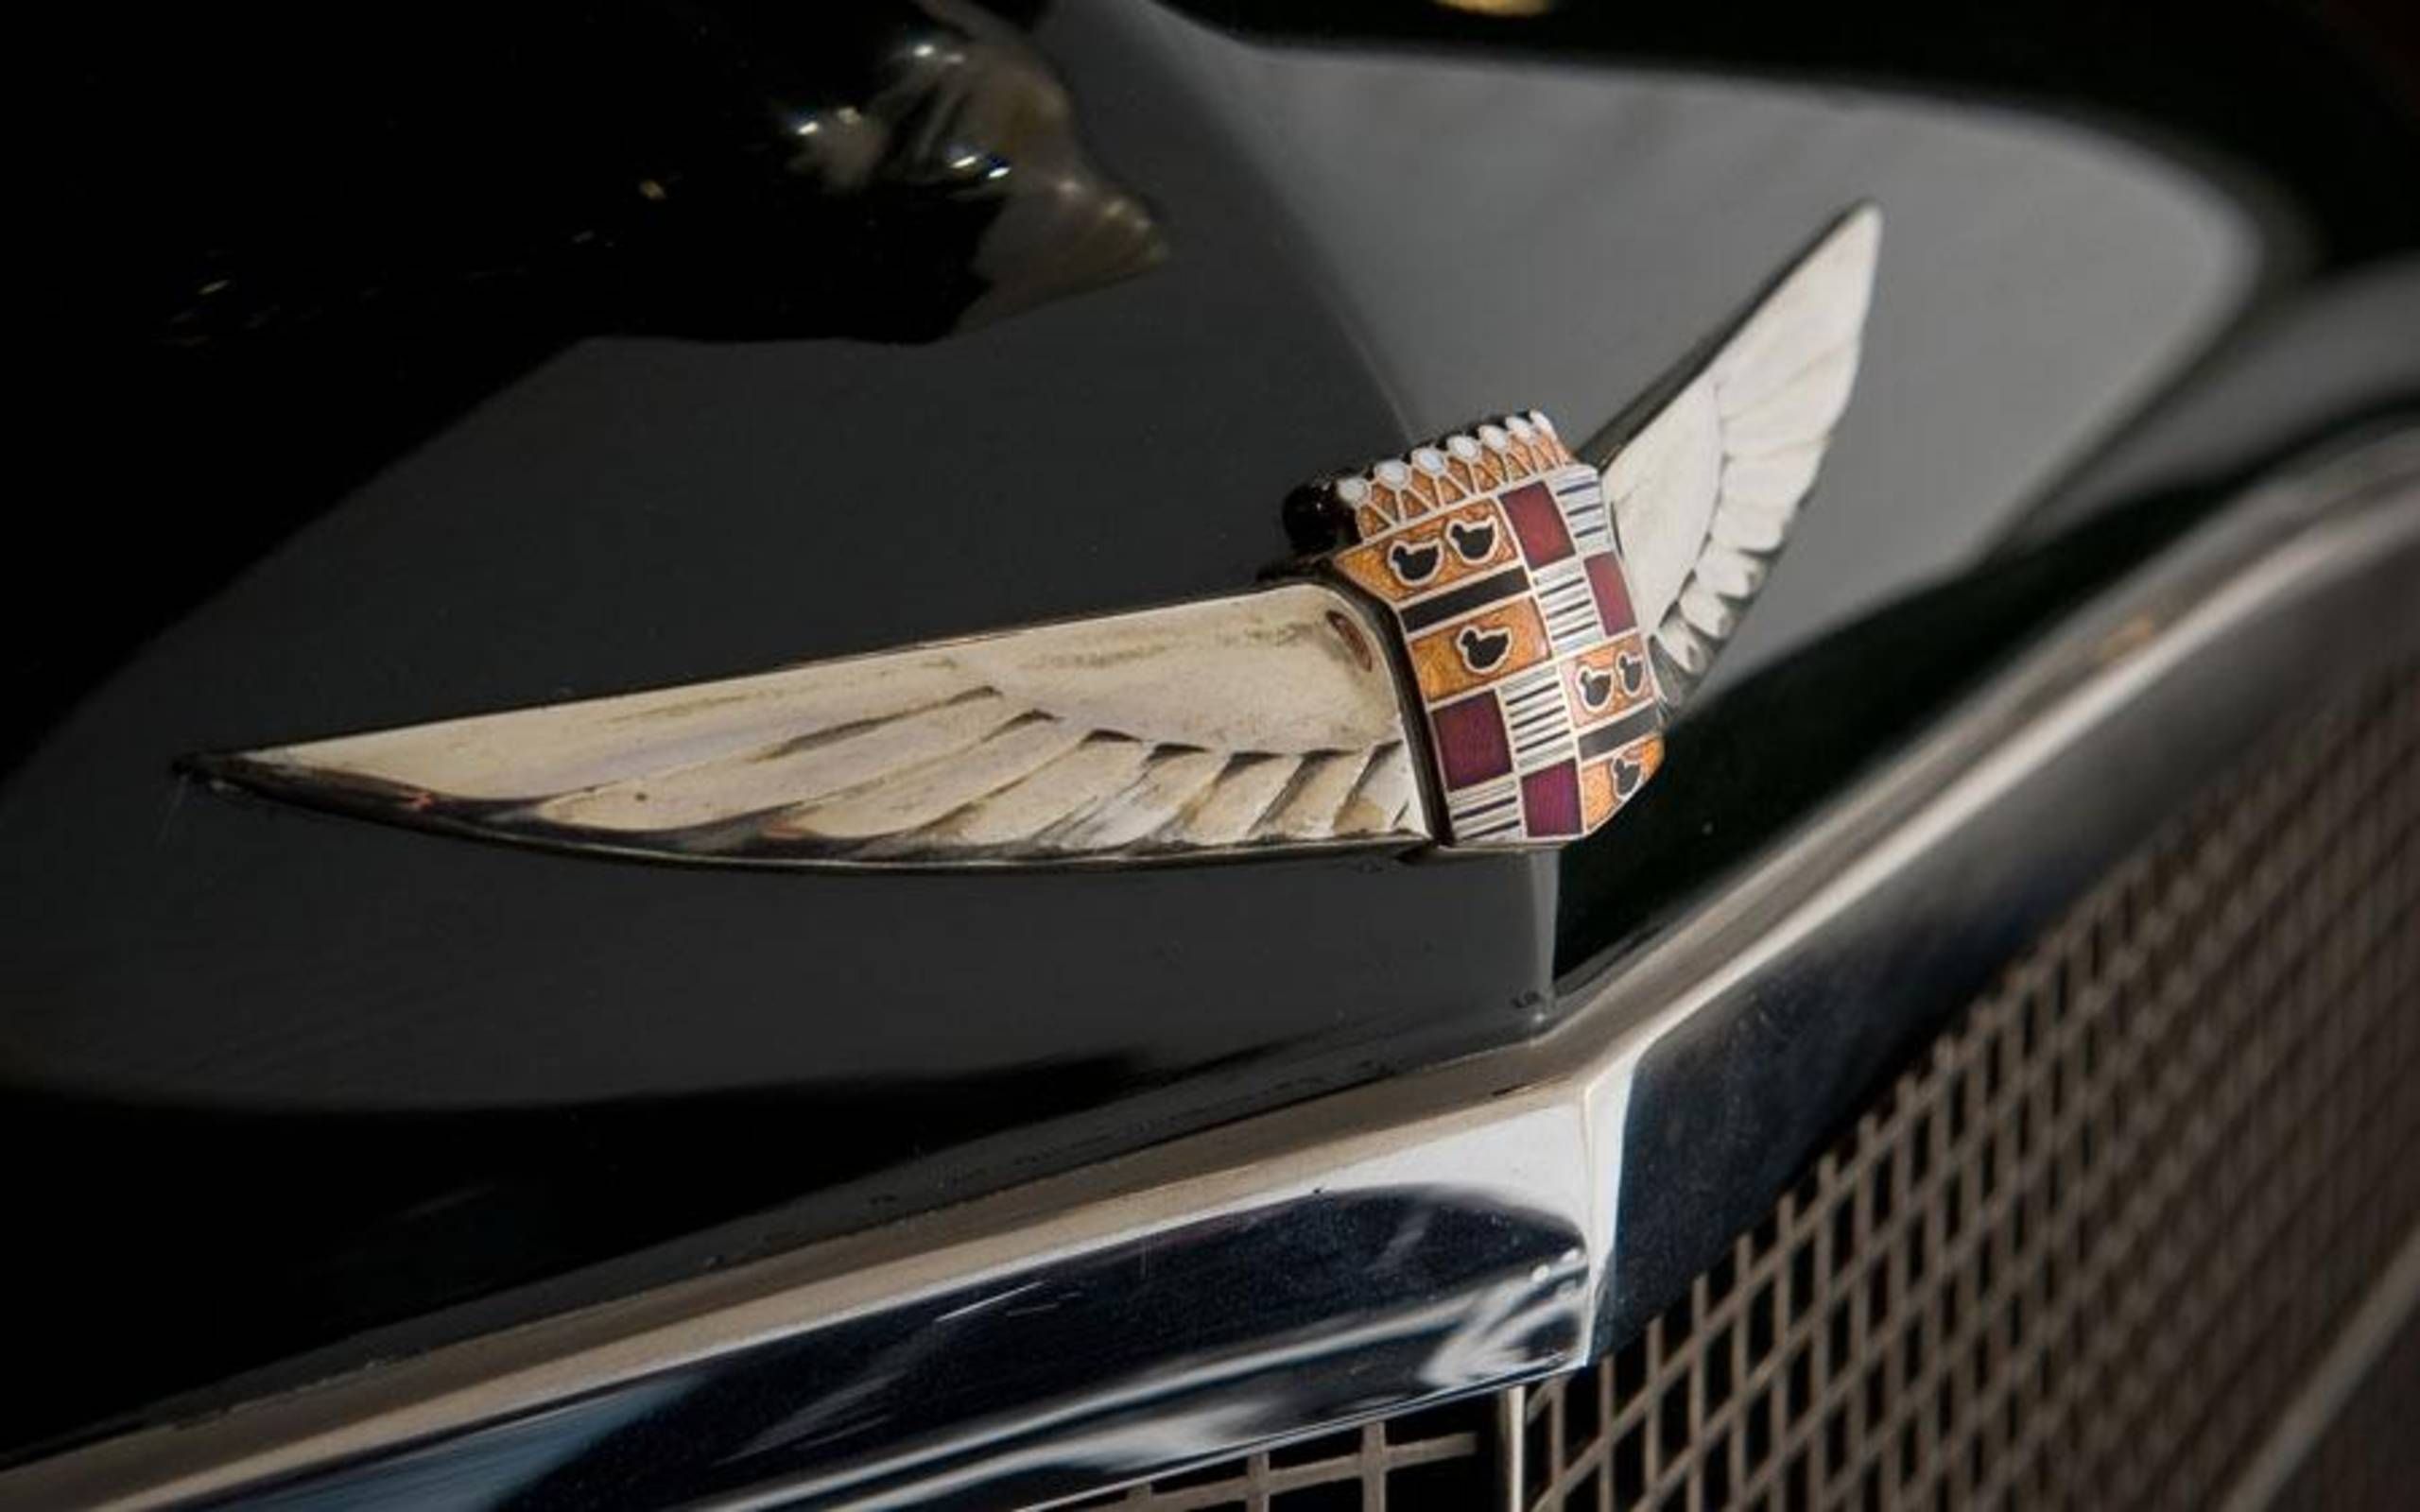 Putting focus on the ever-receding hood ornament